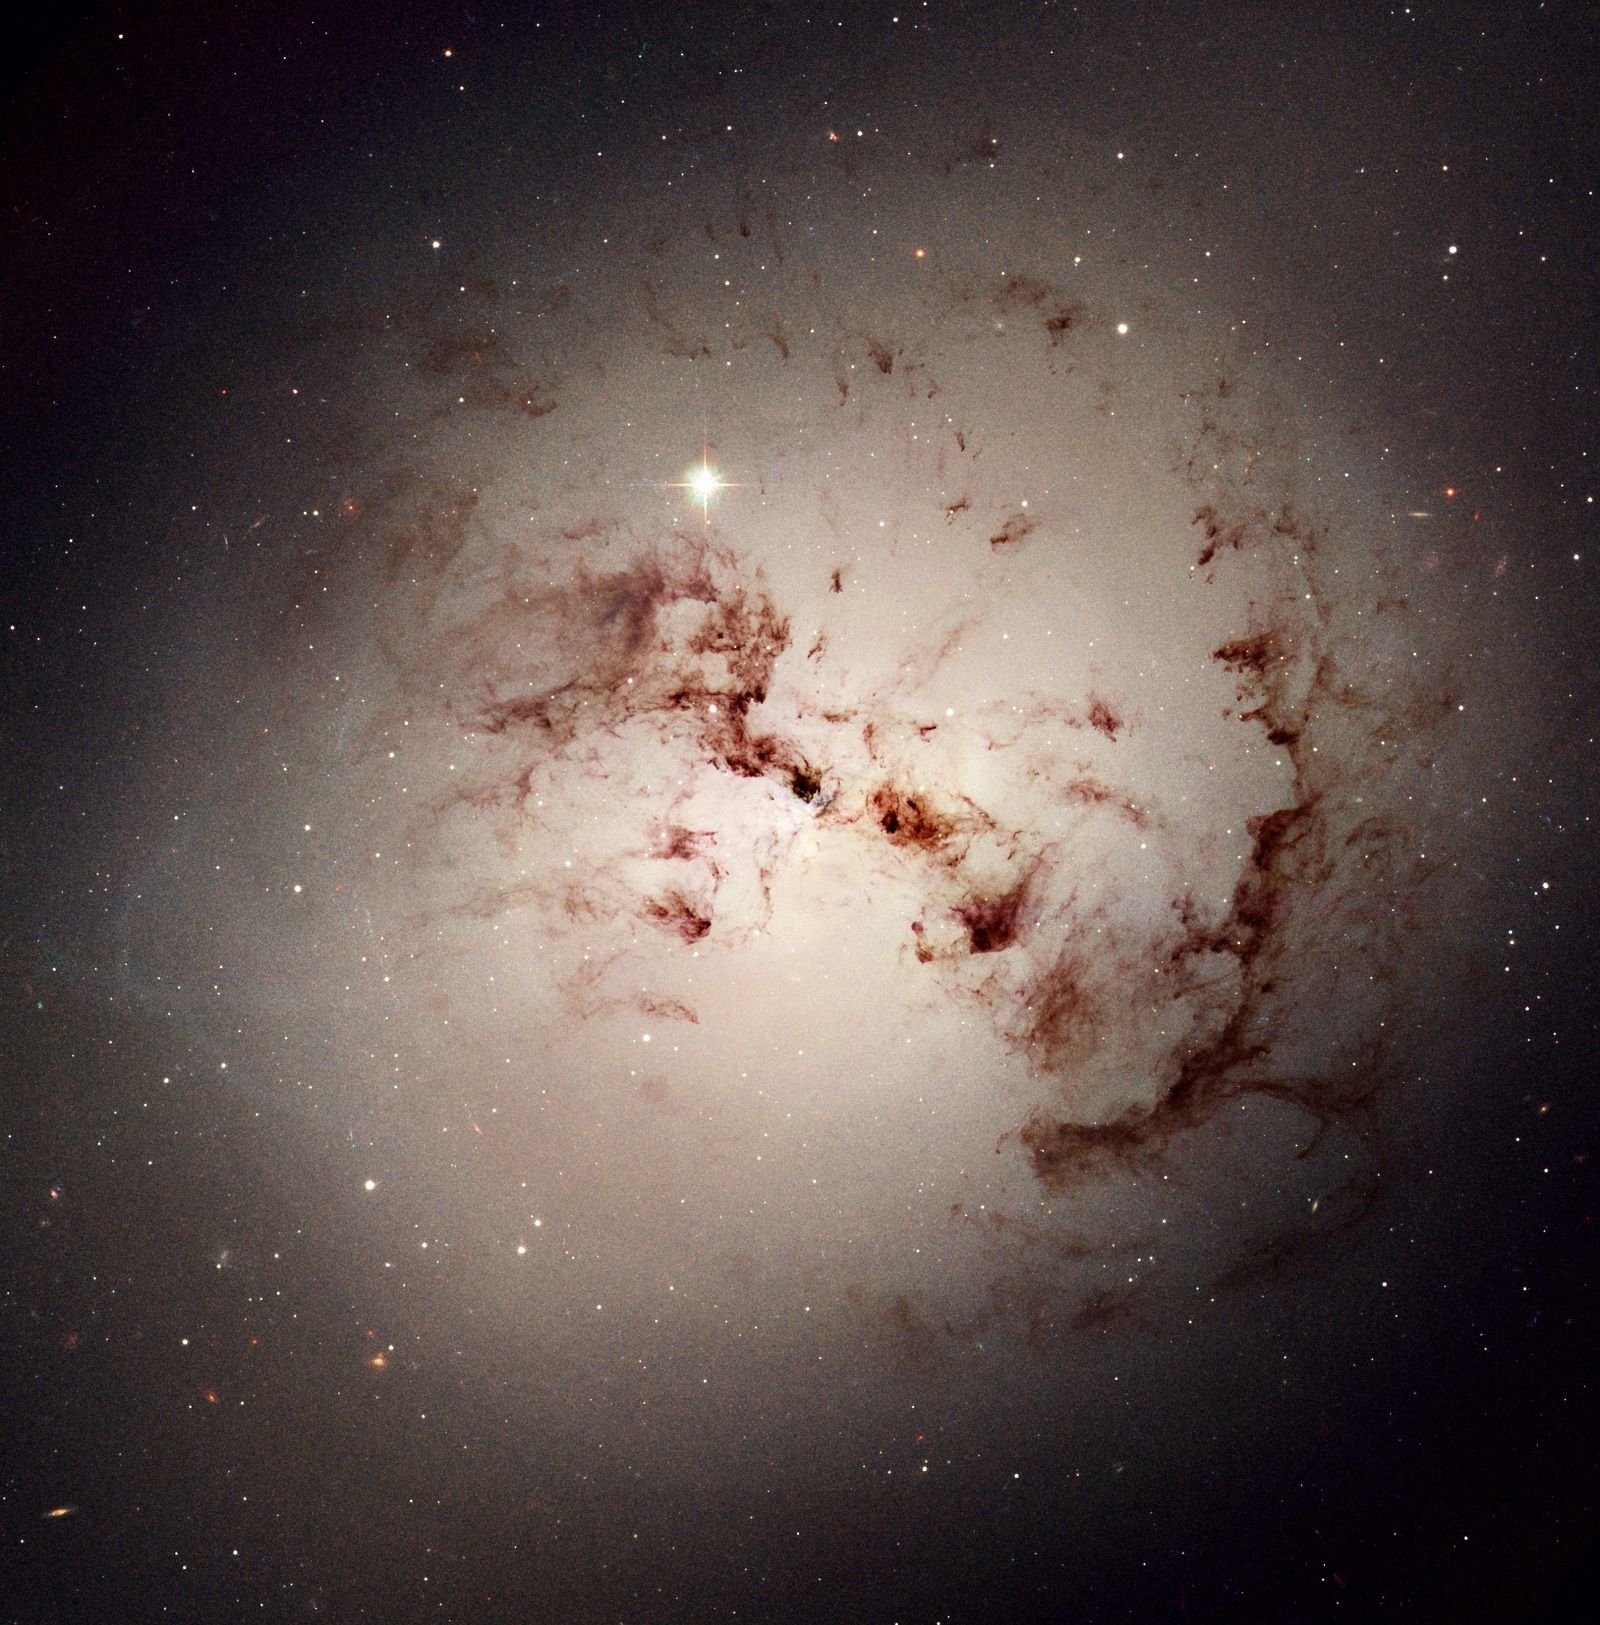 Astounding images from the depths of the Universe courtesy of the Hubble Space Telescope image 13